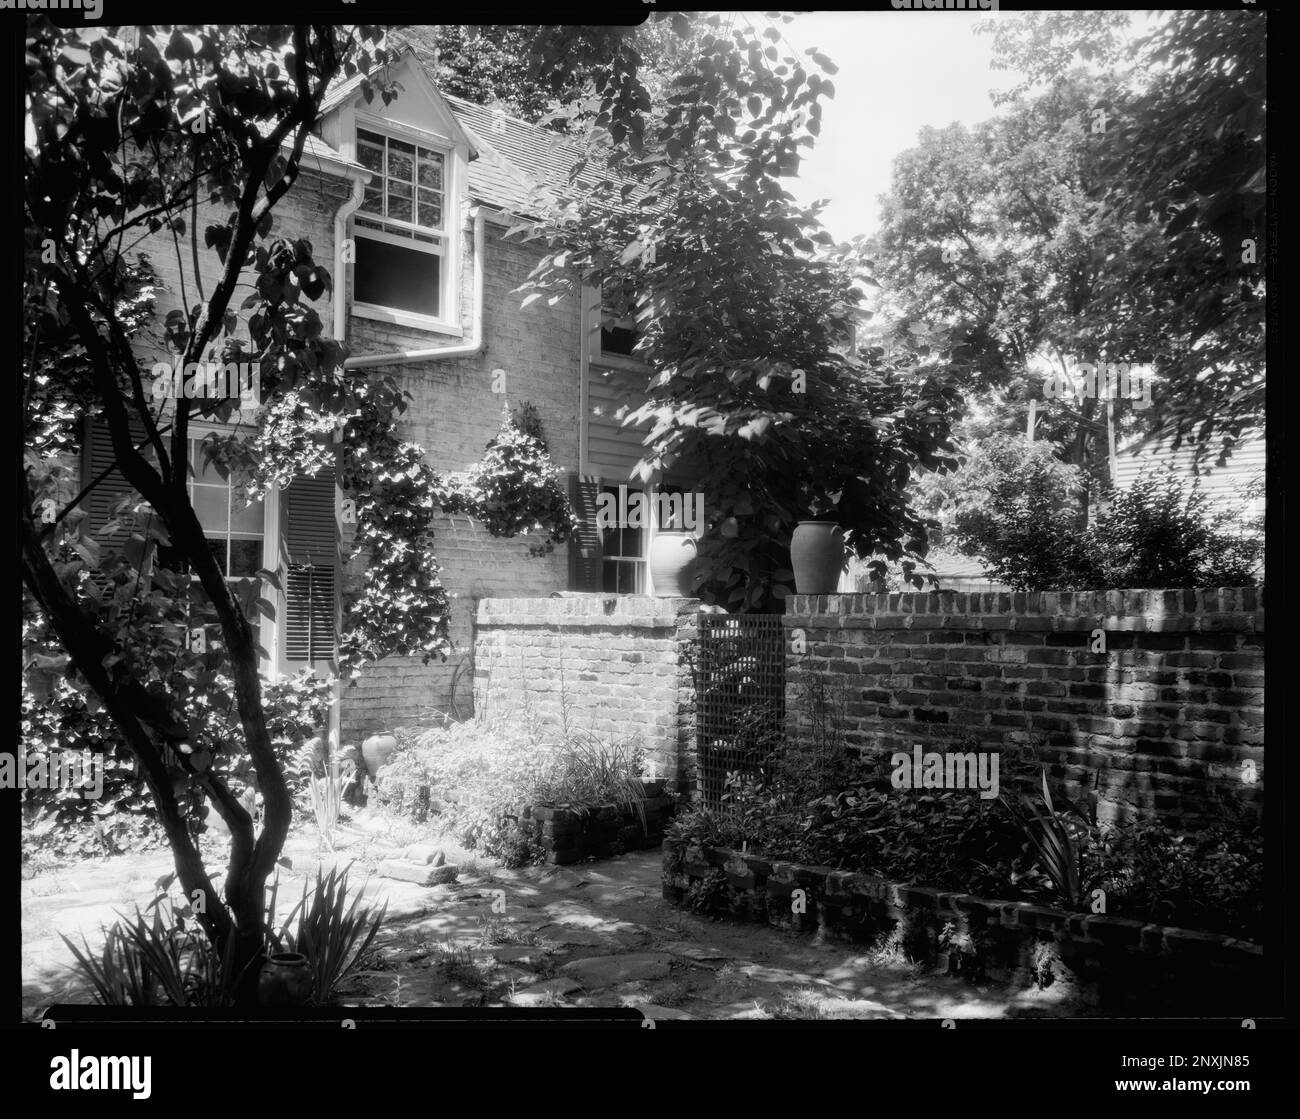 The Quarters, Miss Doggett's House, Fredericksburg, Virginia. Carnegie Survey of the Architecture of the South. Stati Uniti Virginia Fredericksburg, Garden Walls, Gardens, Patios, Houses. Foto Stock